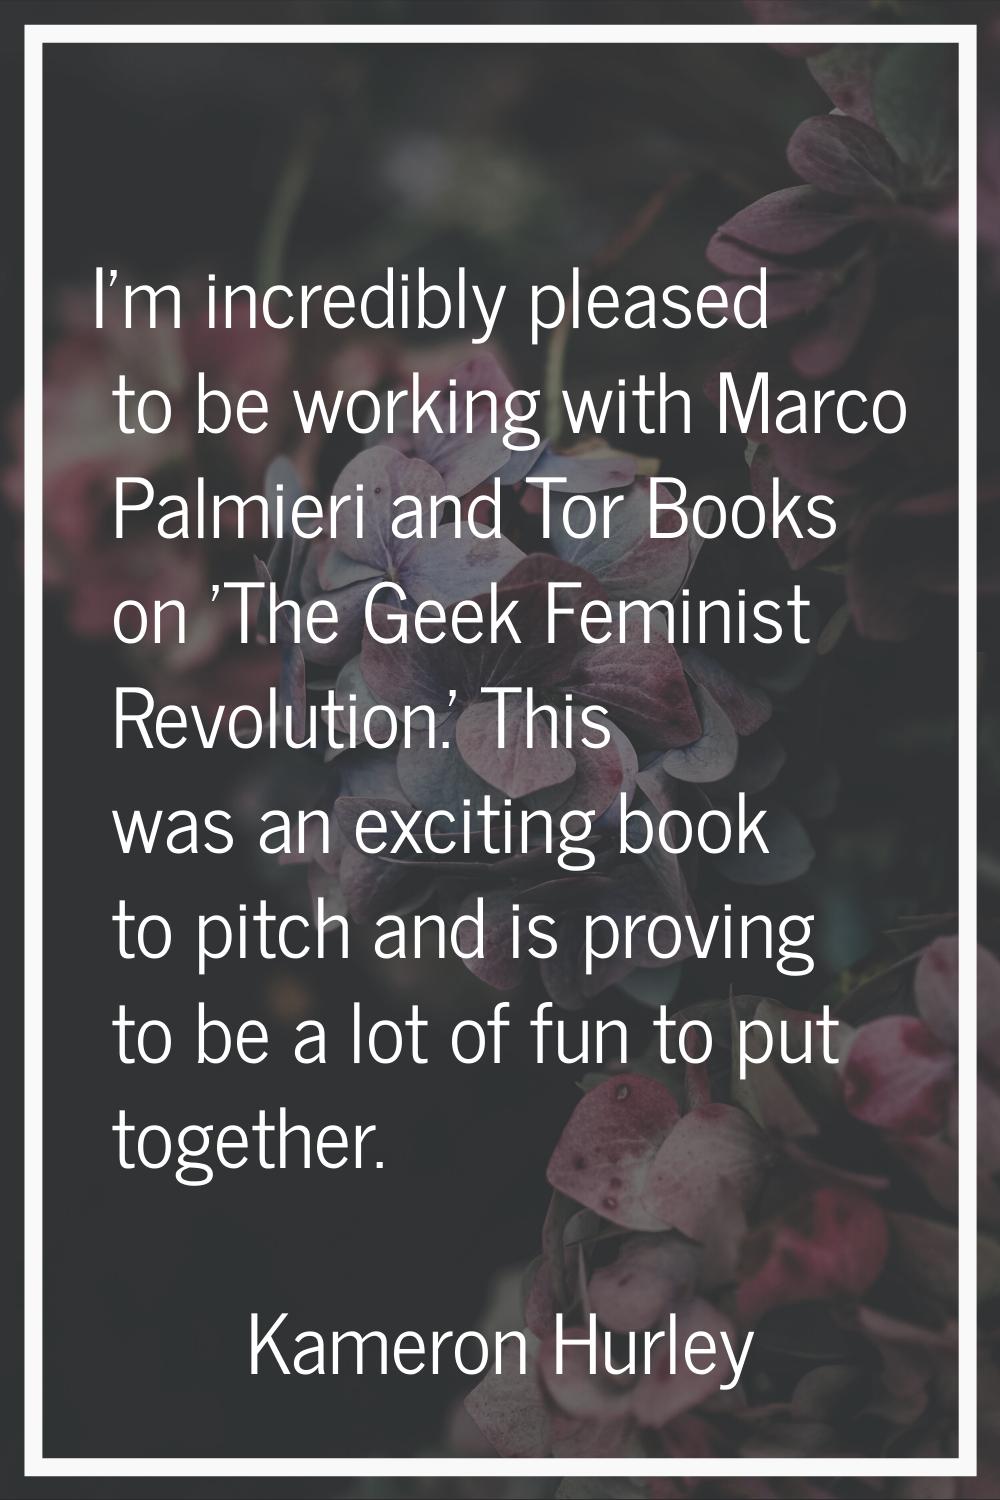 I'm incredibly pleased to be working with Marco Palmieri and Tor Books on 'The Geek Feminist Revolu